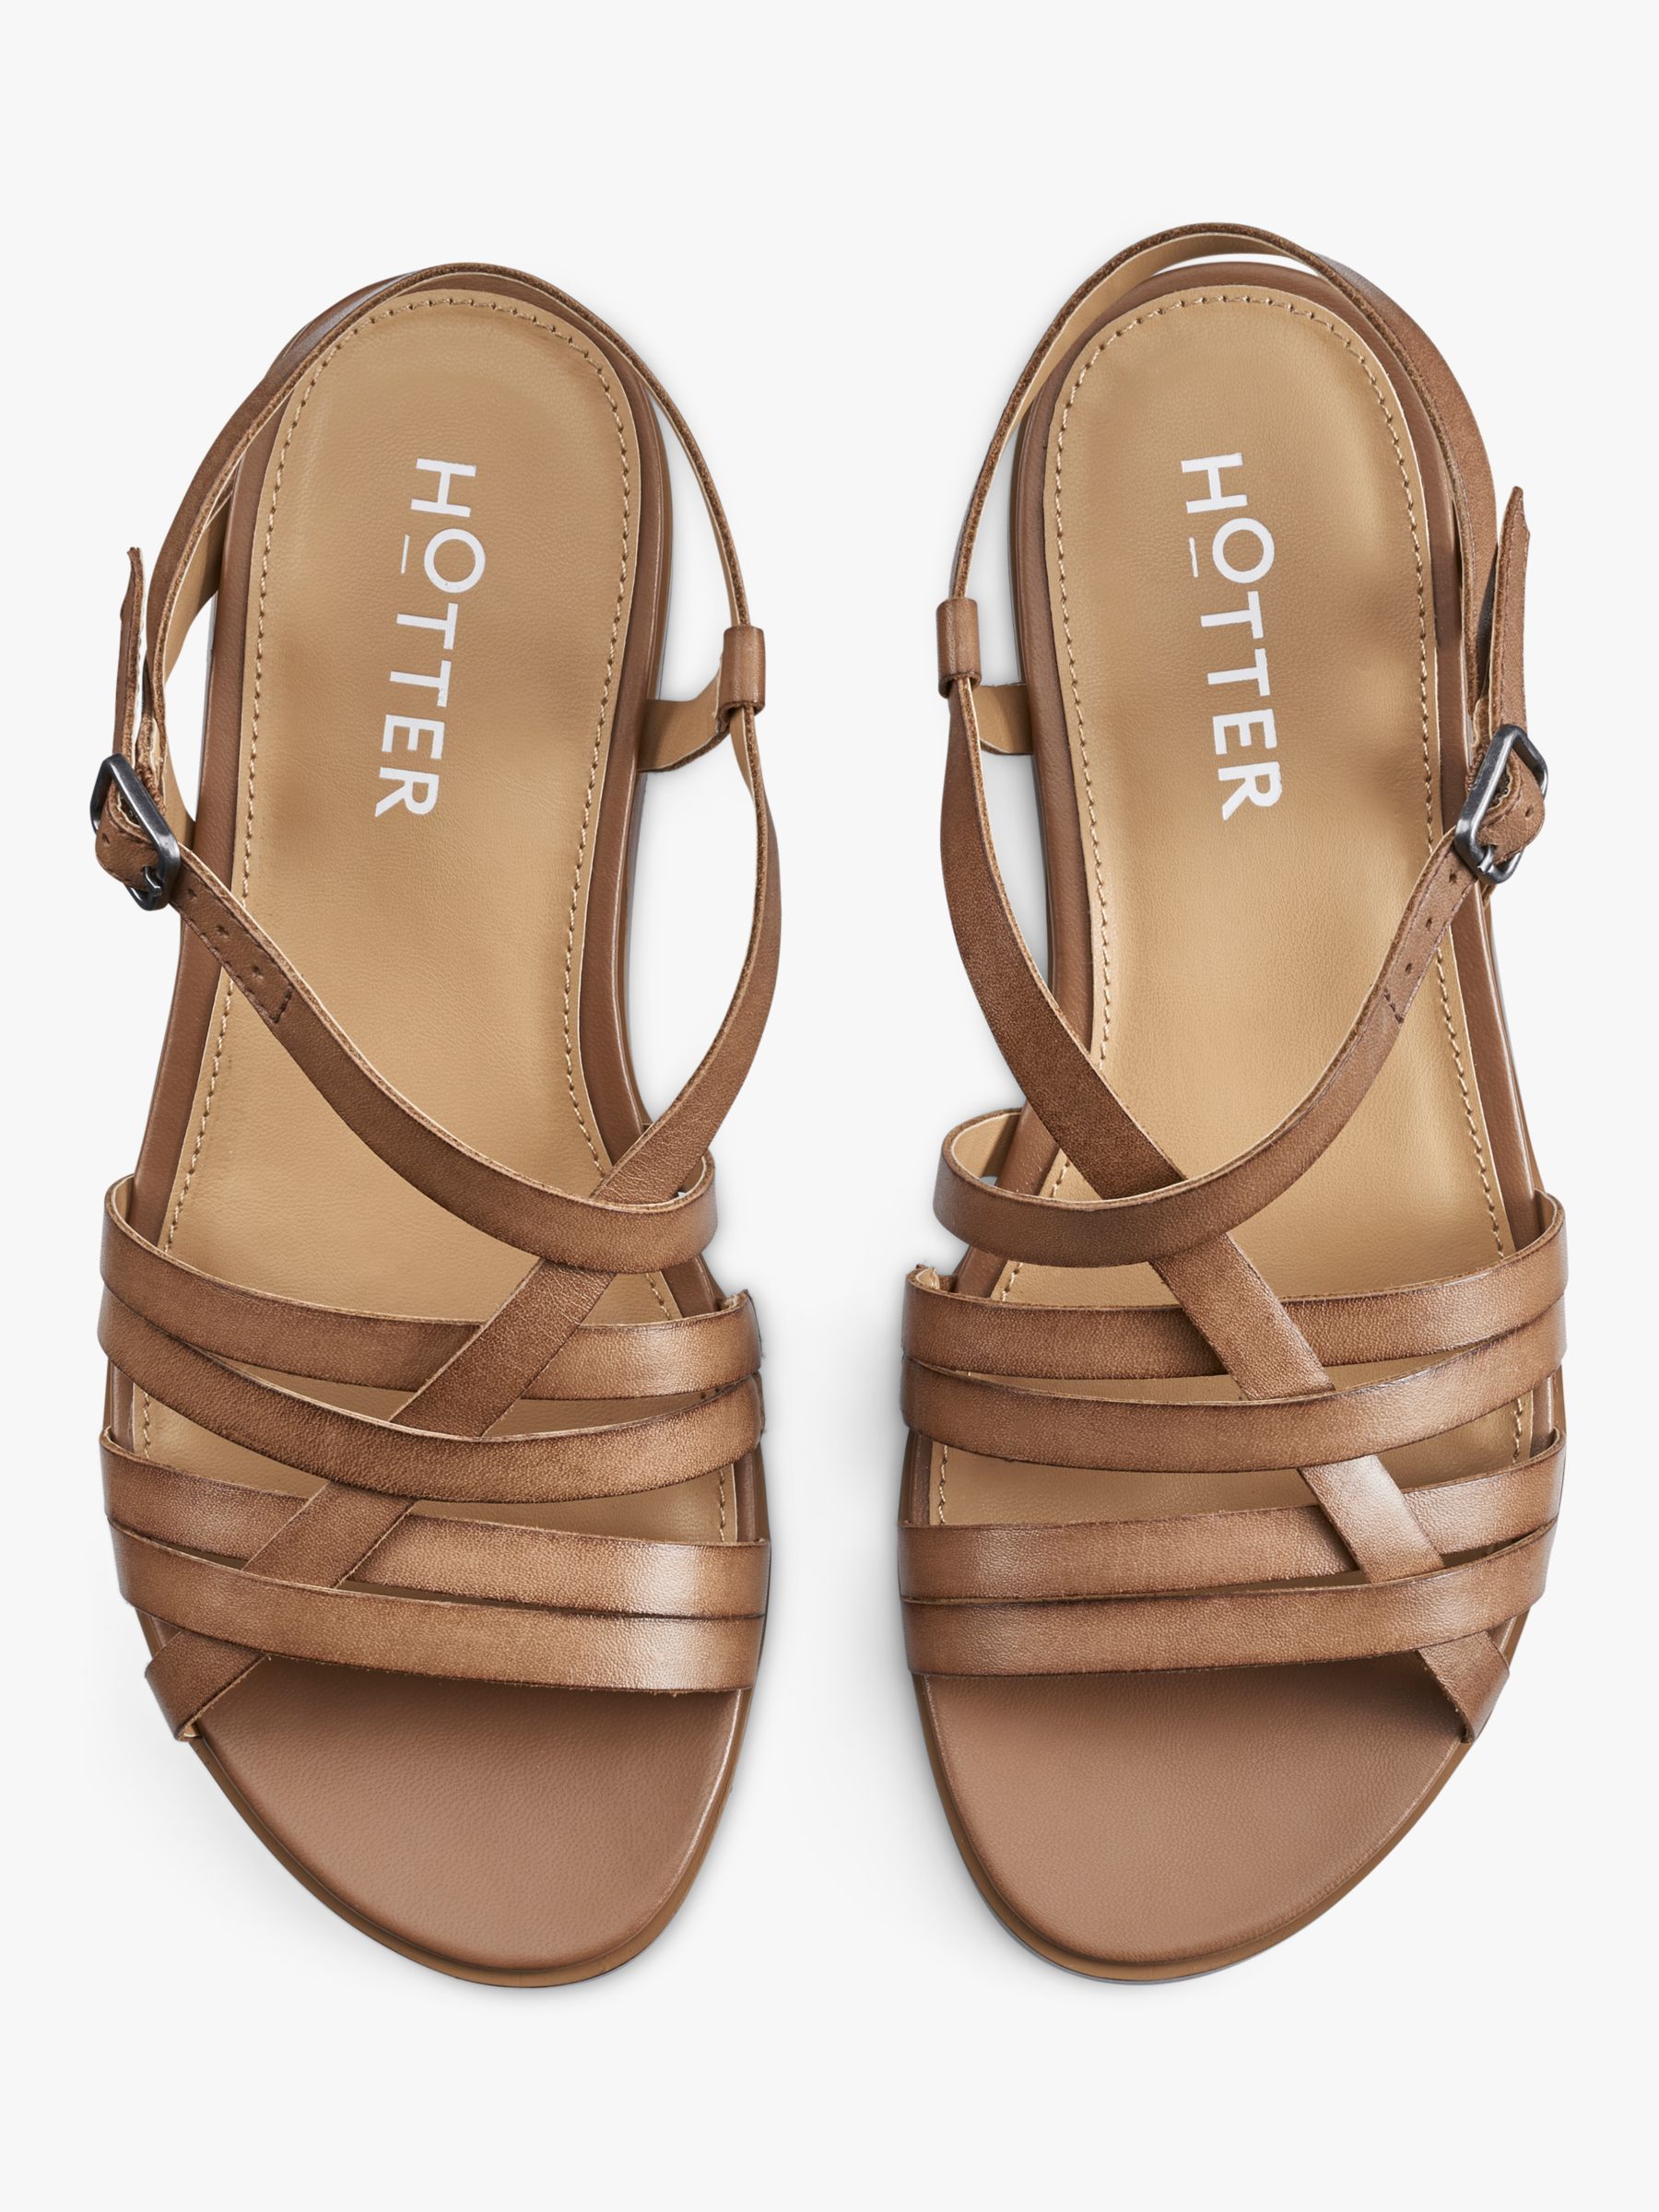 Buy Hotter Sienna Wide Fit Strappy Sandals, Rich Tan Online at johnlewis.com